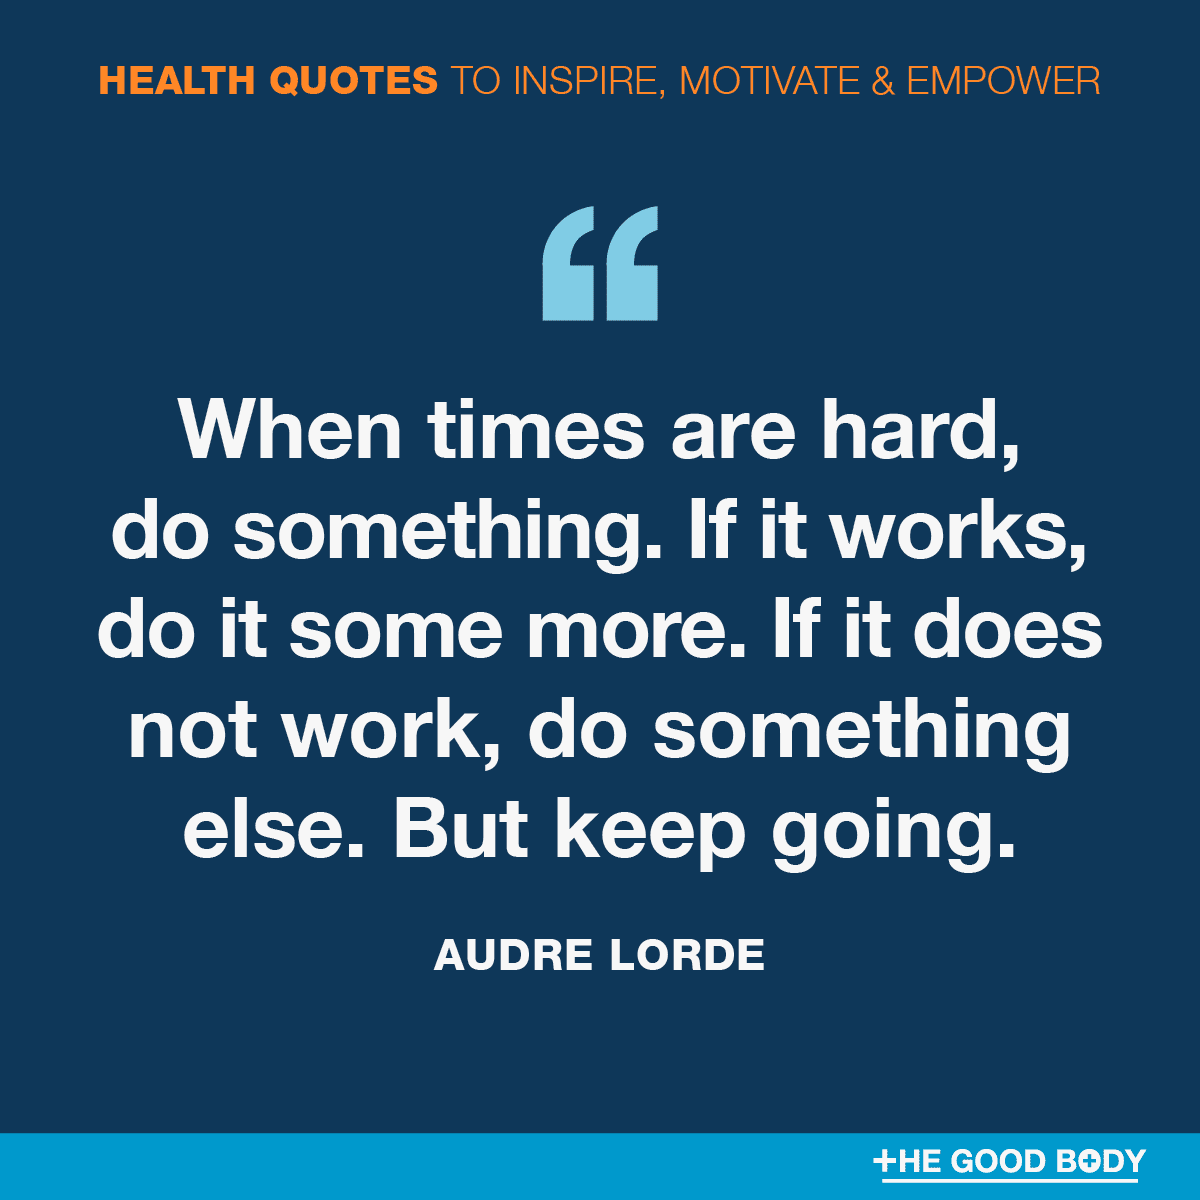 Motivational Mental Health Quotes #6 by Audre Lorde